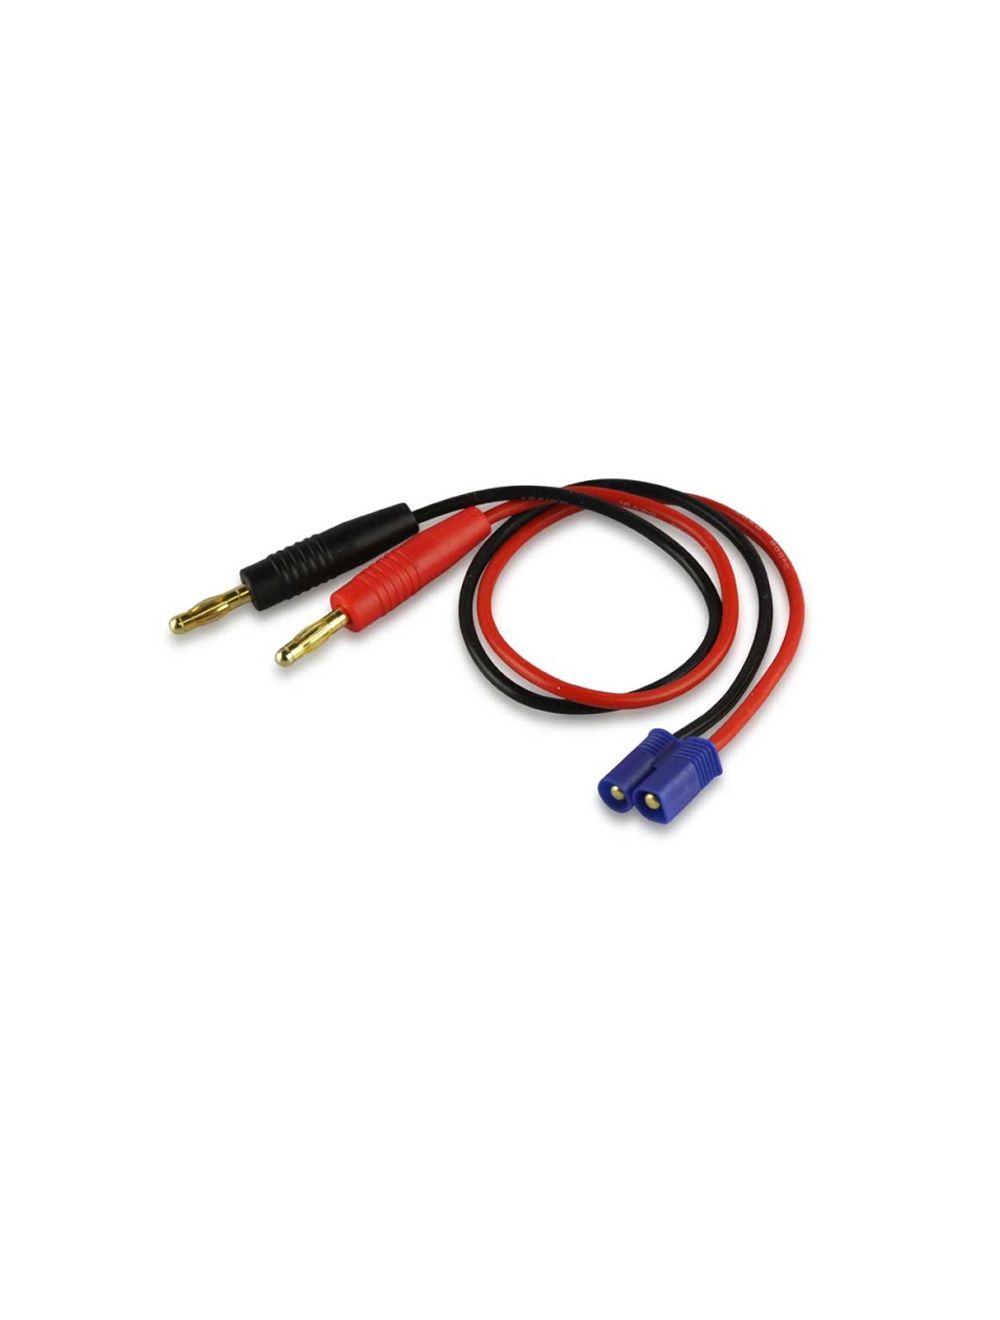 Overlander EC3 to 4mm Gold Connectors Charge Lead 722